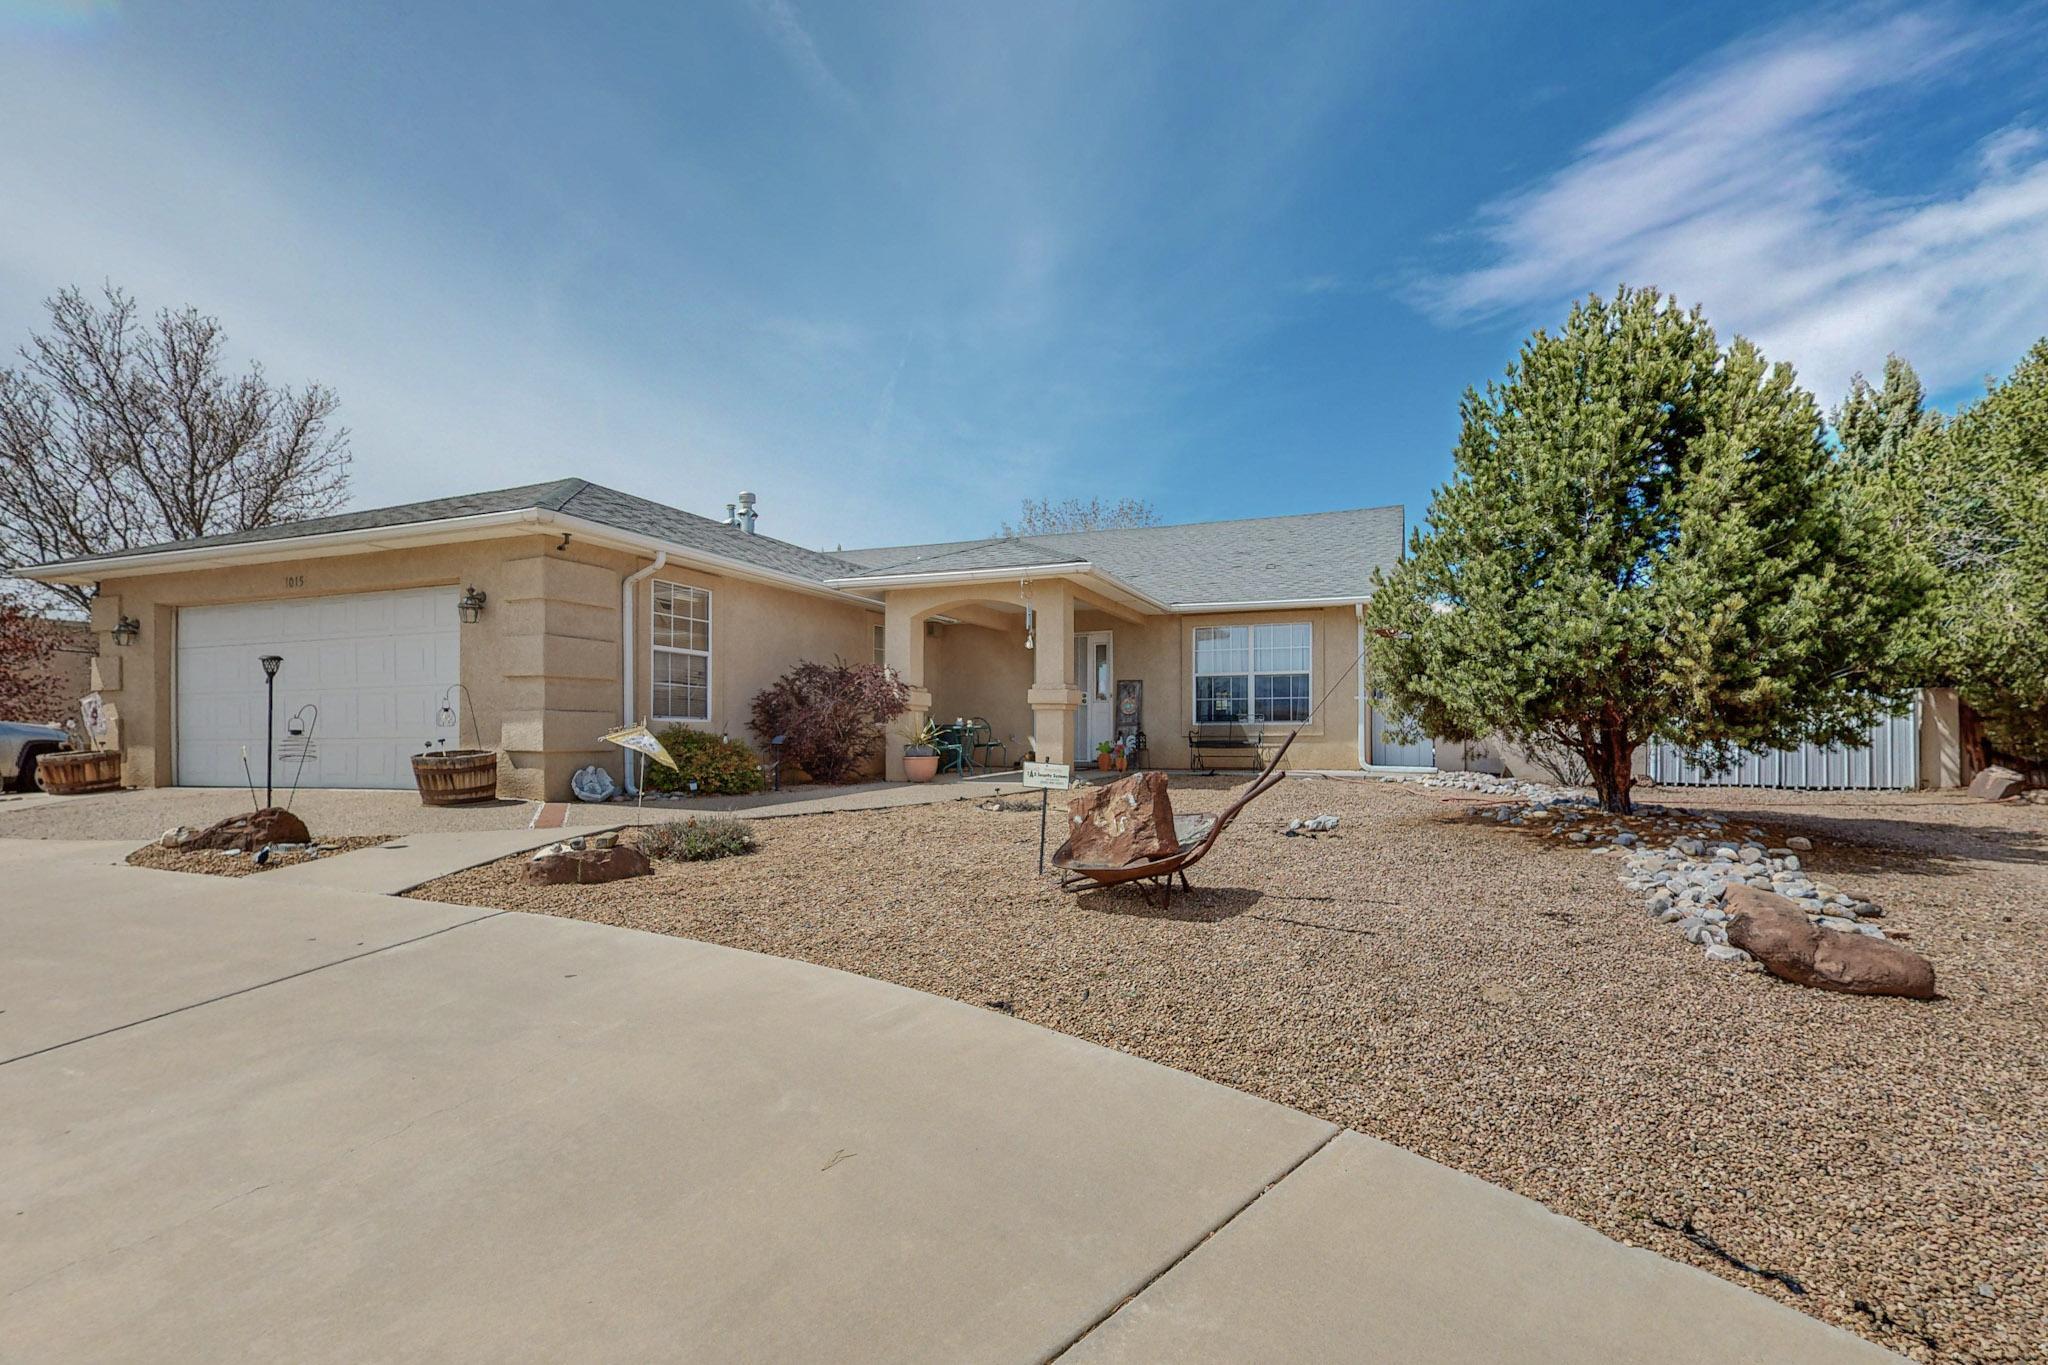 OPEN HOUSE 4/12/24! Here is the one you have been waiting for! Is there a car enthusiast or hobbyist looking for the perfect blend of beautiful home and space to work on, store, create in a workshop? Look no further! Ranch style custom on 0.5 acre in the heart of Los Lunas has a bright, open floorpan with great room concept. Raised ceilings, newer flooring, nearly new stove in the kitchen and a sunroom are all wonderful features. A finished 24x30 detached garage/workshop plus 20x30 carport are in addition to the attached 2 gar garage, making this home a rare find! Backyard access and huge yard with trees, grass, and a large open patio. Mountain views from the fully landscaped front yard and quiet neighborhood make this property extra special.